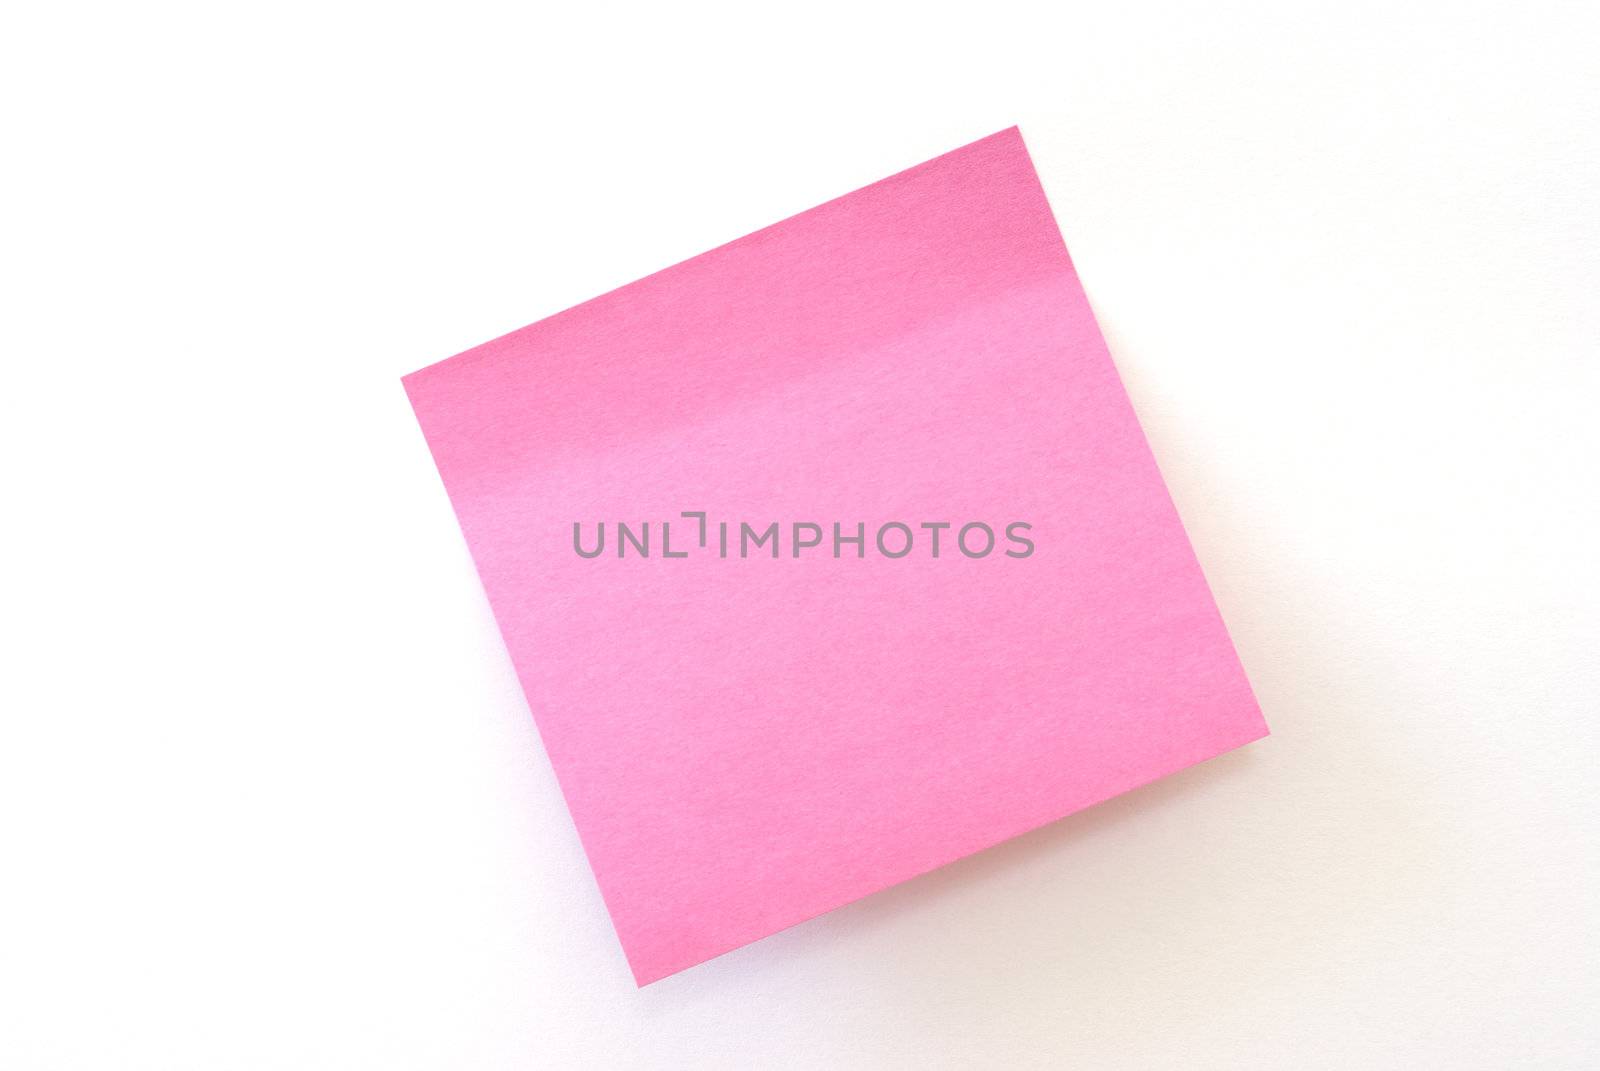 An isolated pink sticky note on white background.